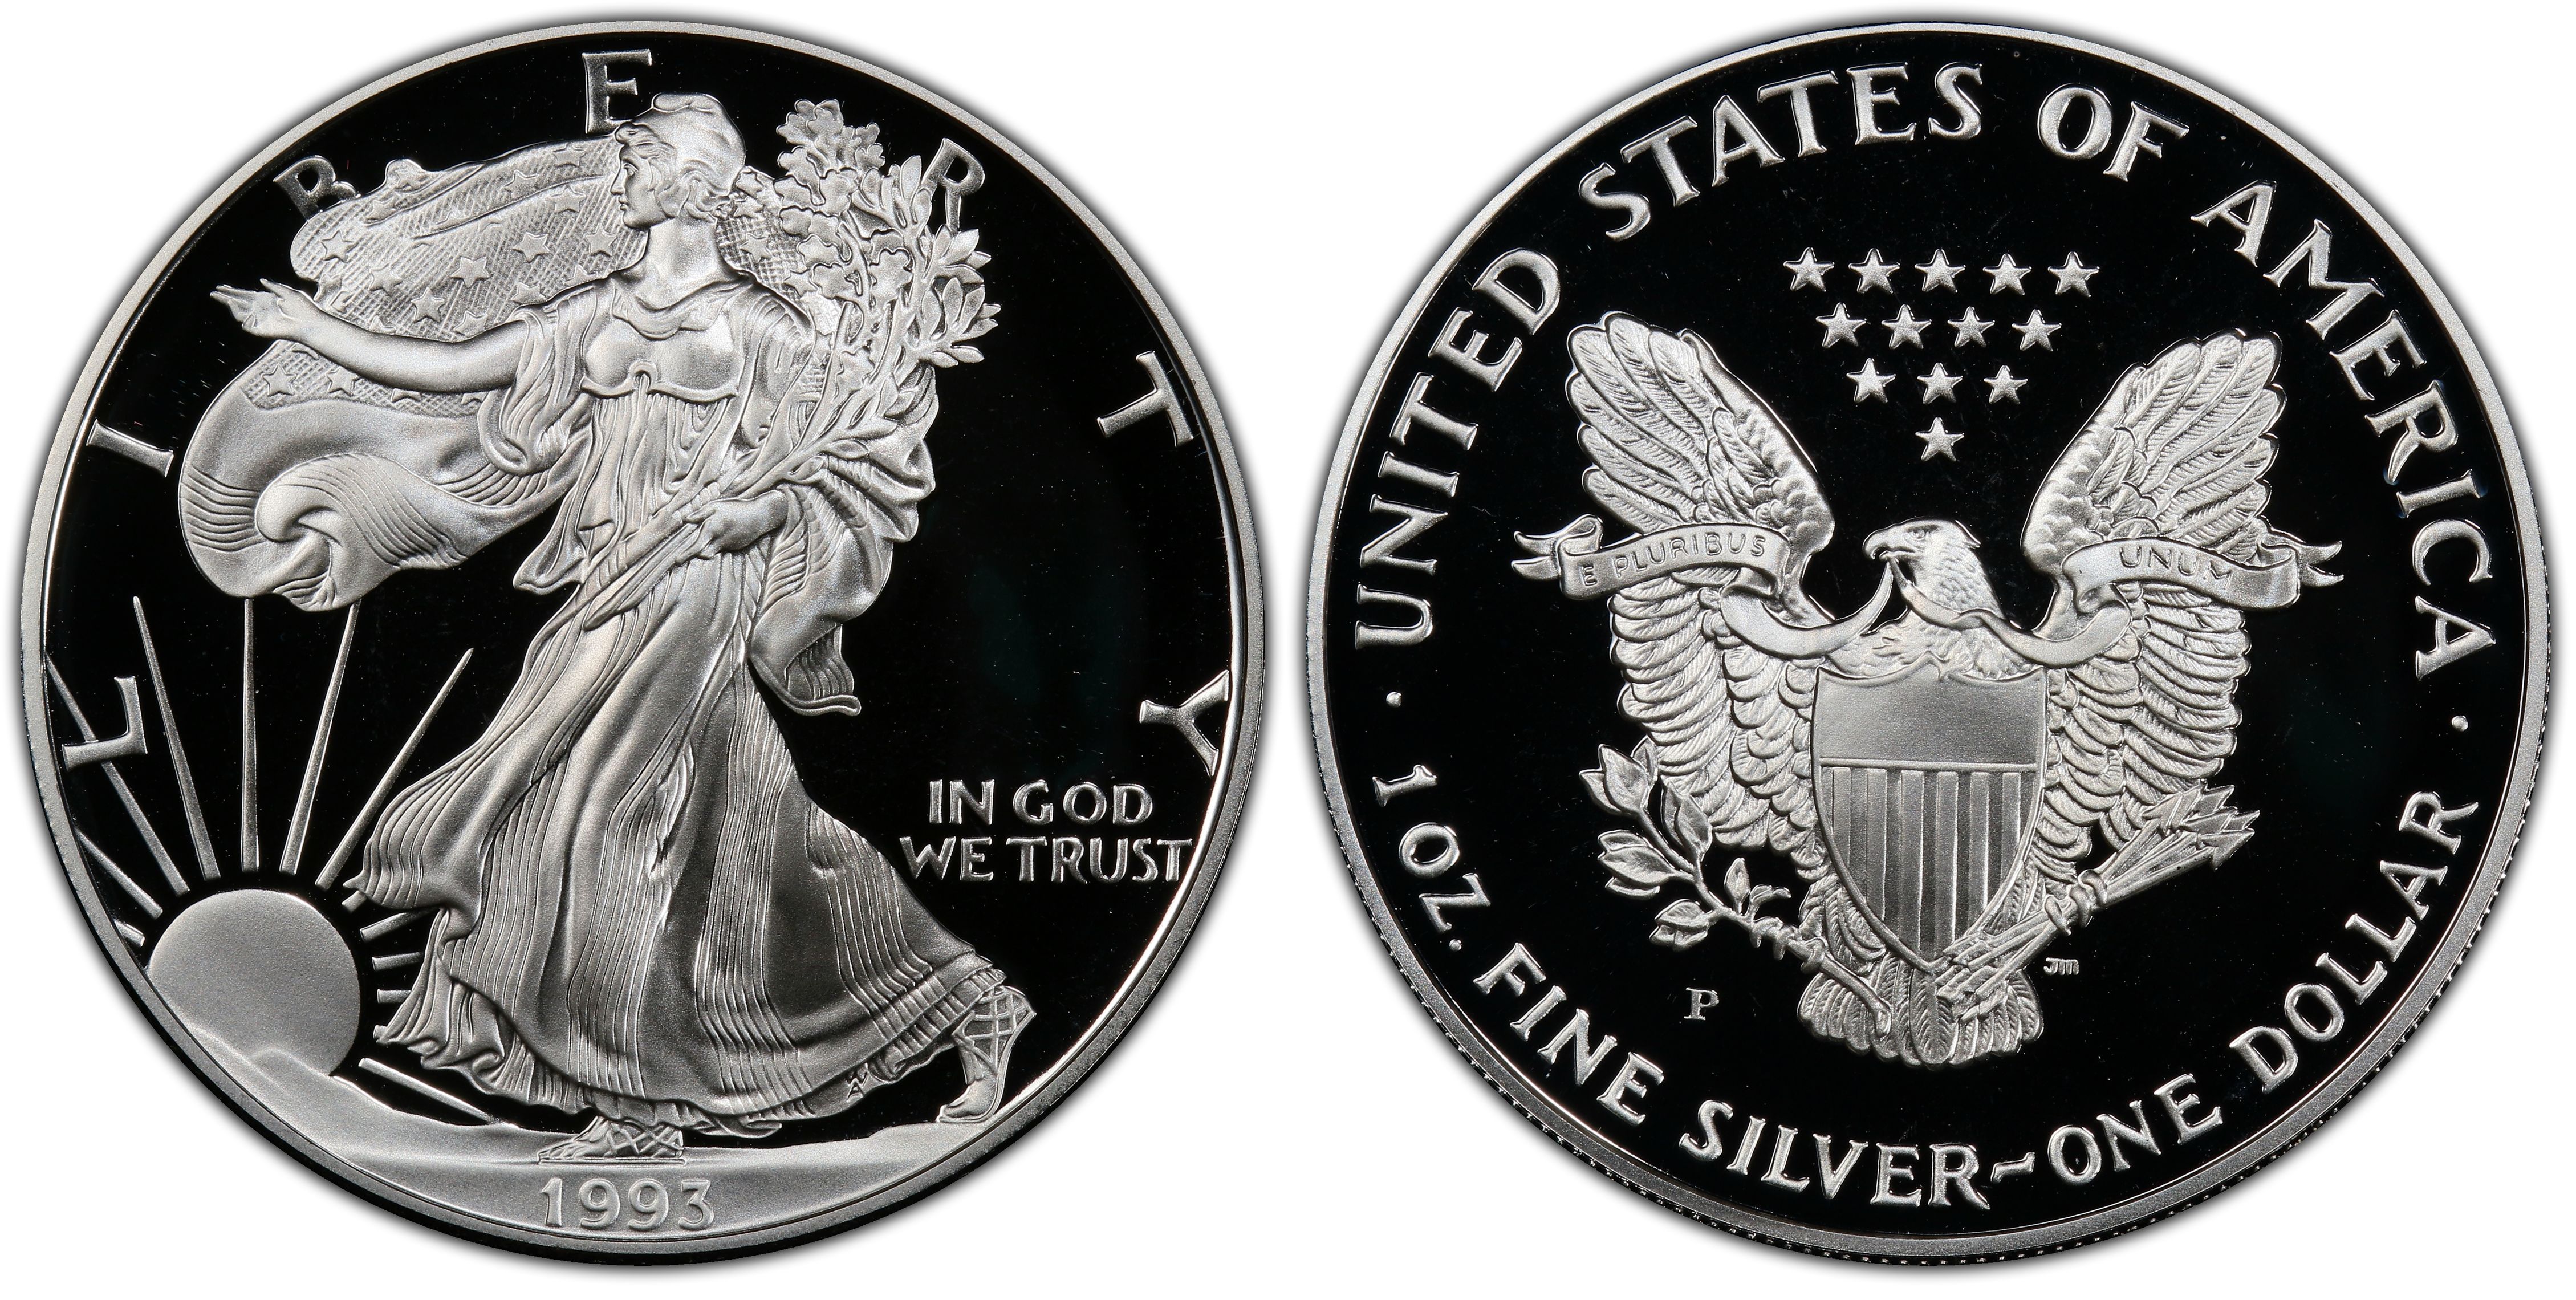 NO COIN 1993 P PROOF SILVER EAGLE BOX/COA OGP ONLY BUY 2 GET 1 FREE! 